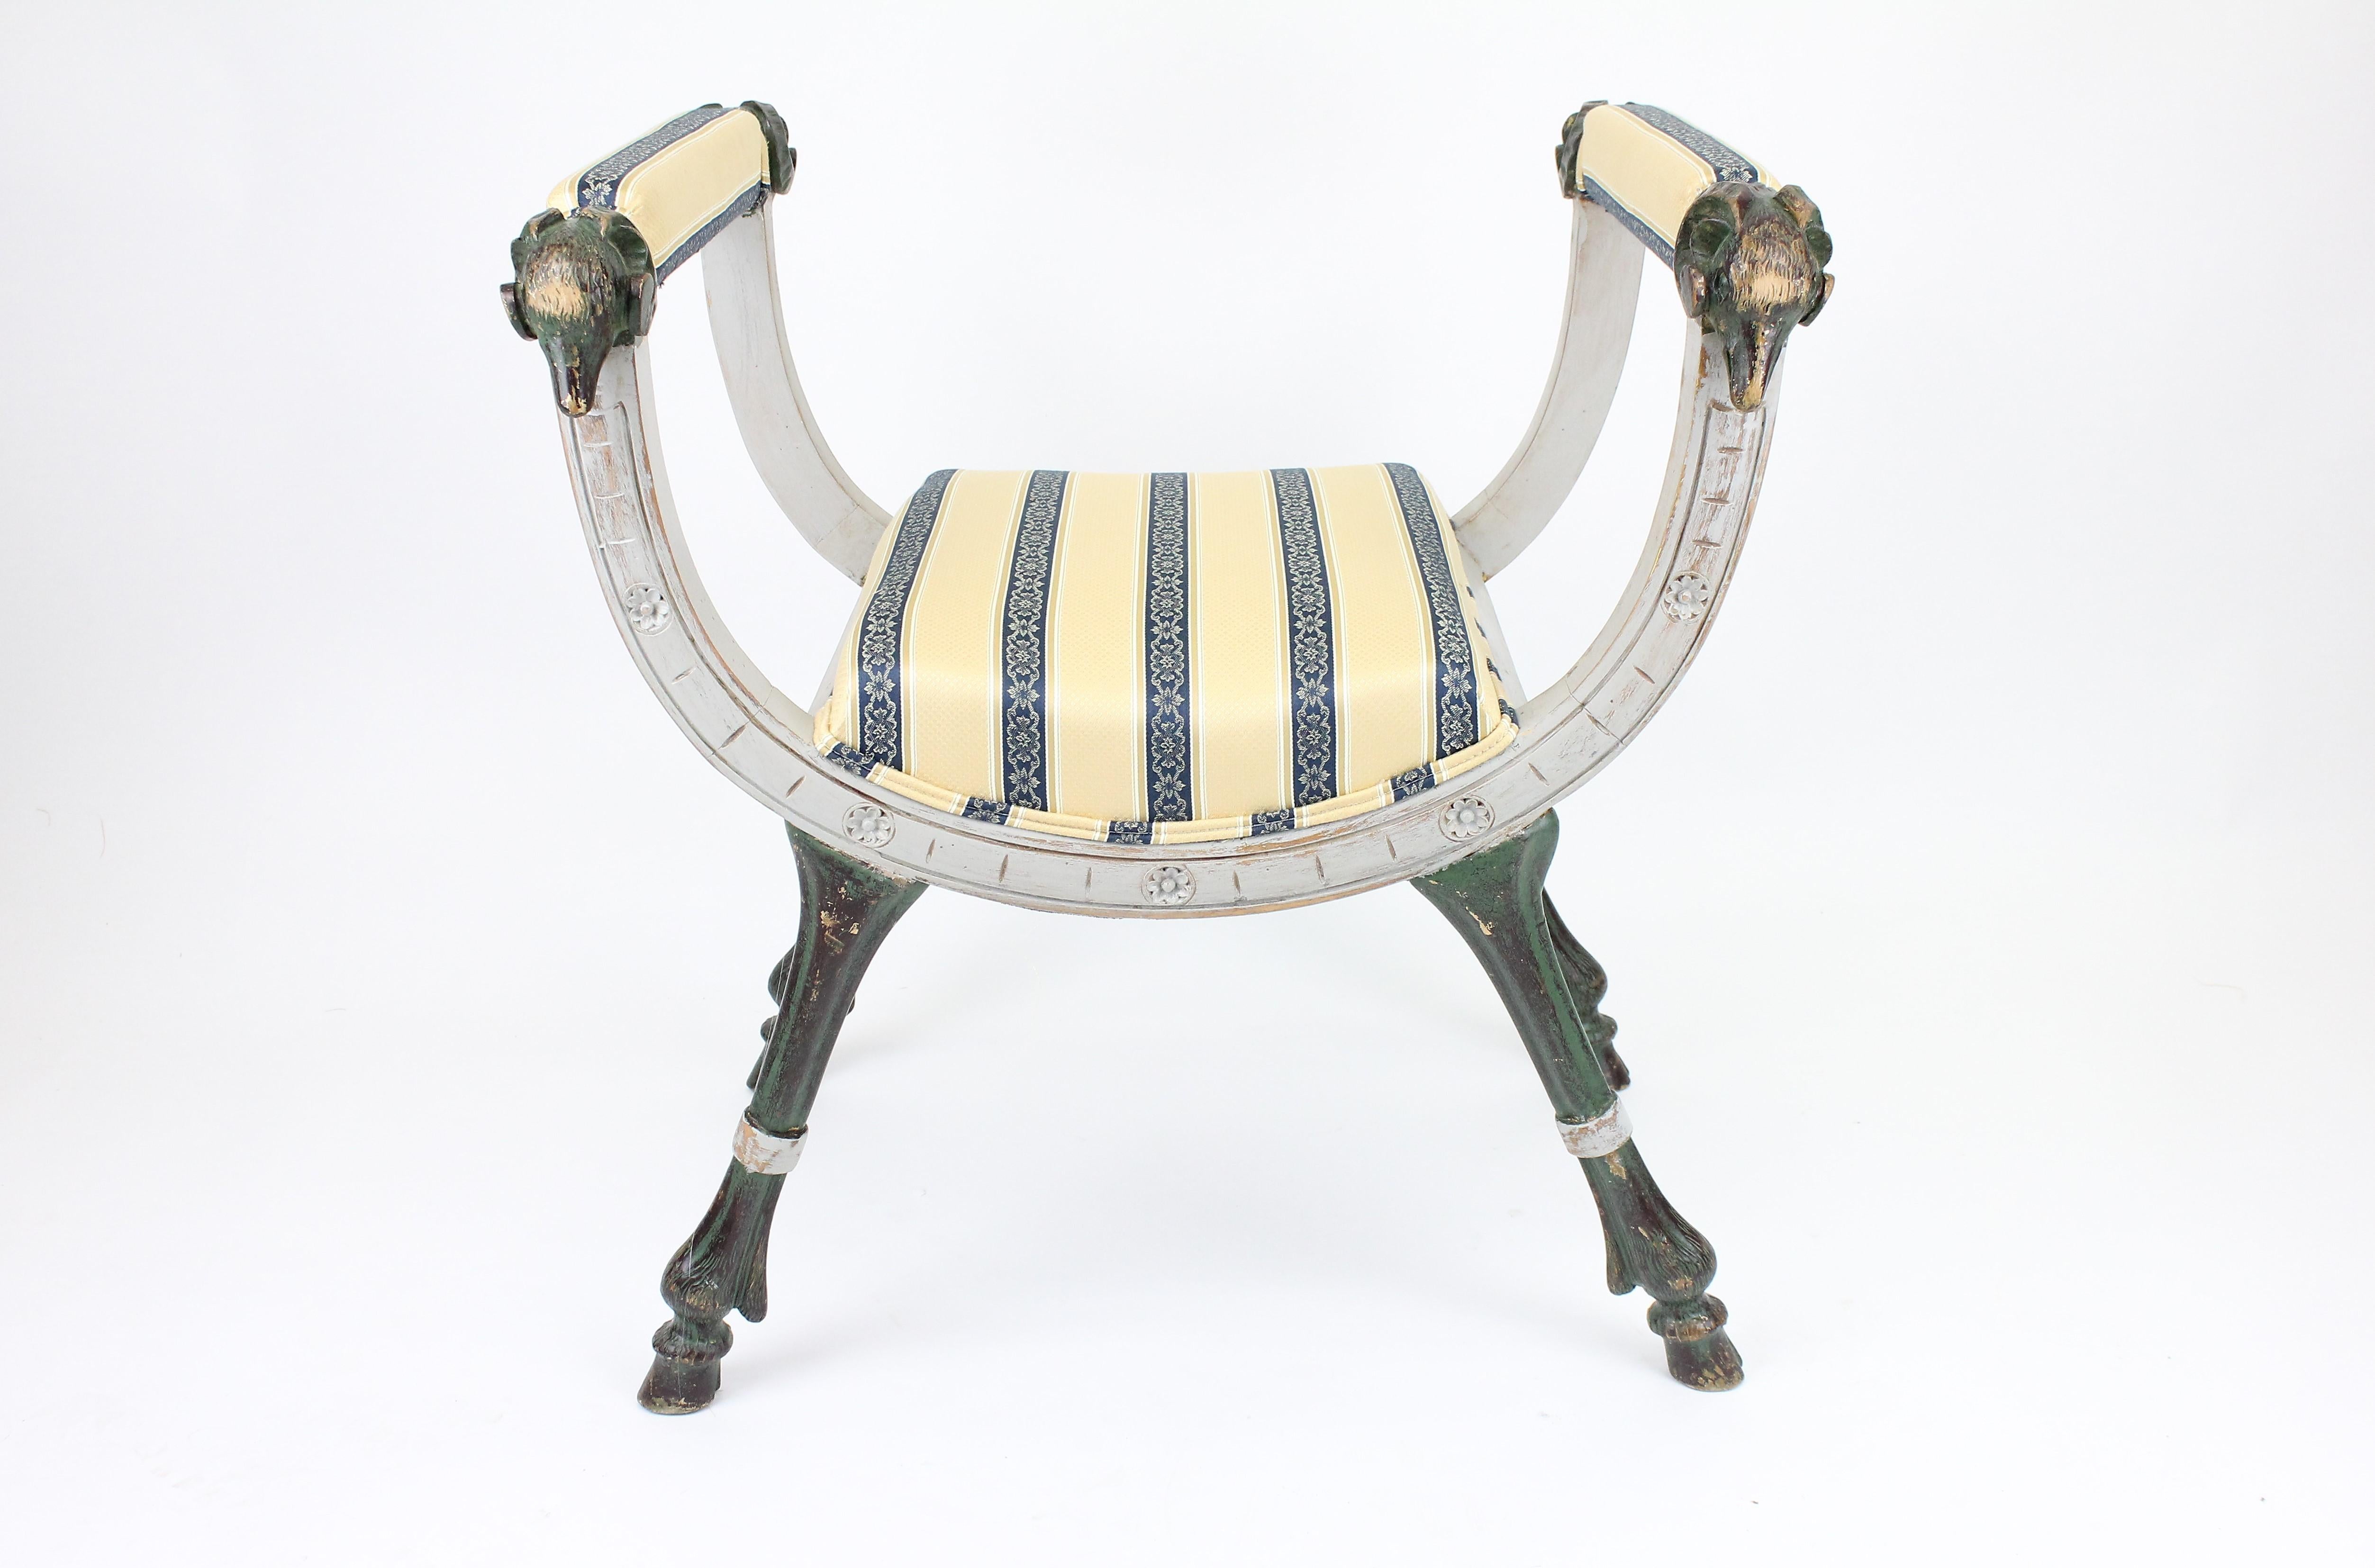 Very stylish stool/bench or banquette.
Late 19th Century. Painted wood and recently reupholstered.
With wood-carved Rams heads and hoof feat.
Painted wood in gray, green, and some black.

See the images for how this looked before it was